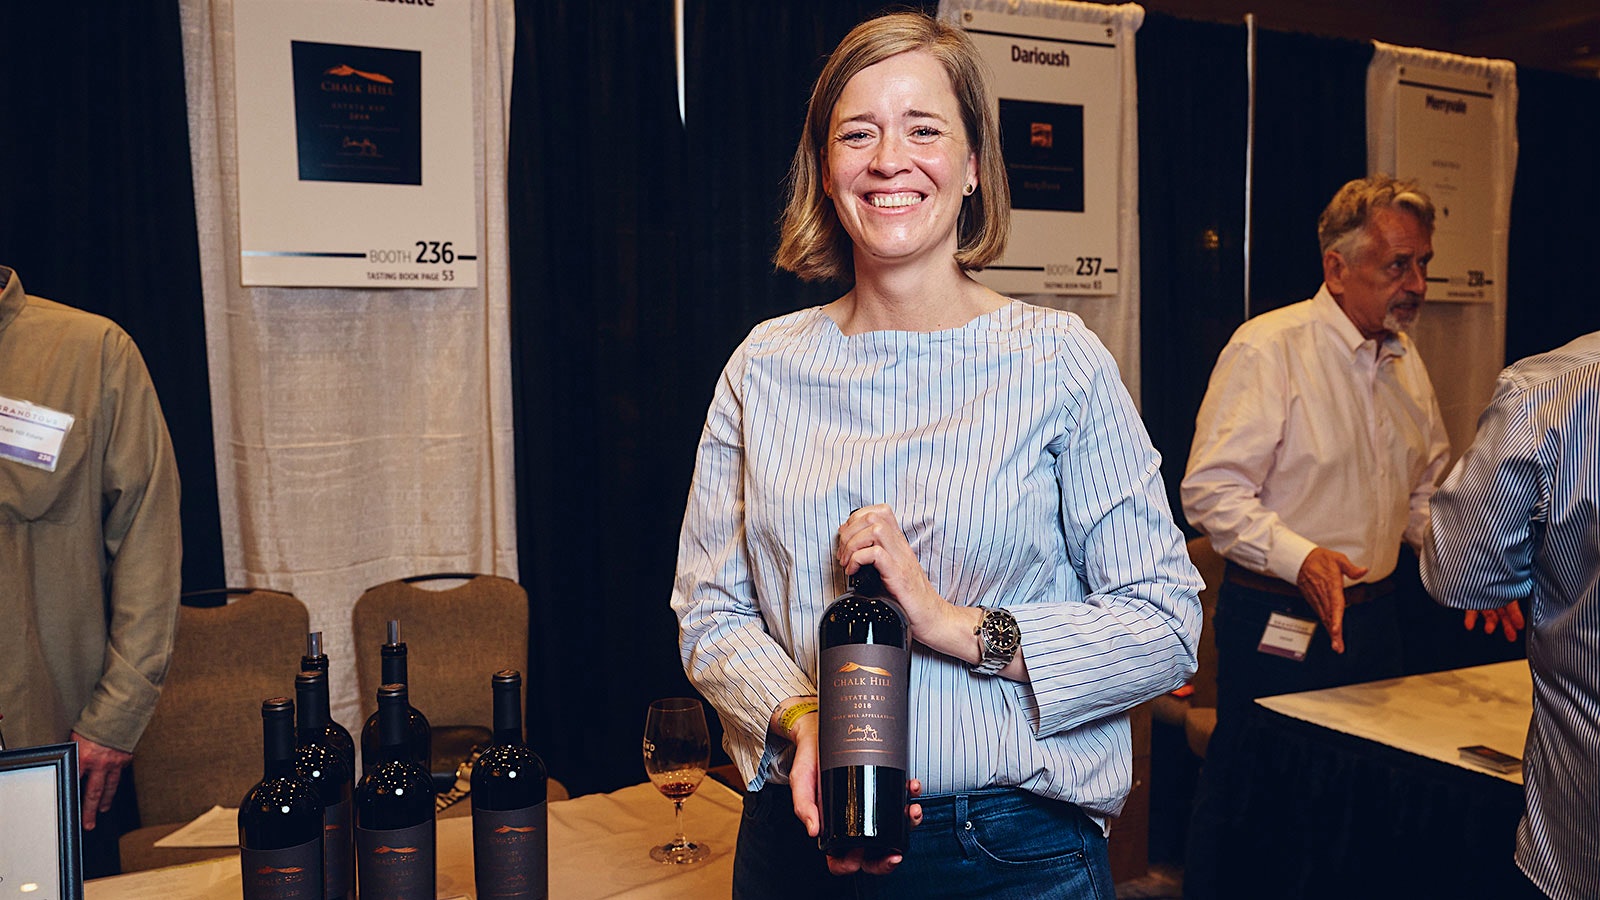  Courtney Foley of Chalk Hill Estate serves a red wine at the Wine Spectator Grand Tour in New Orleans.